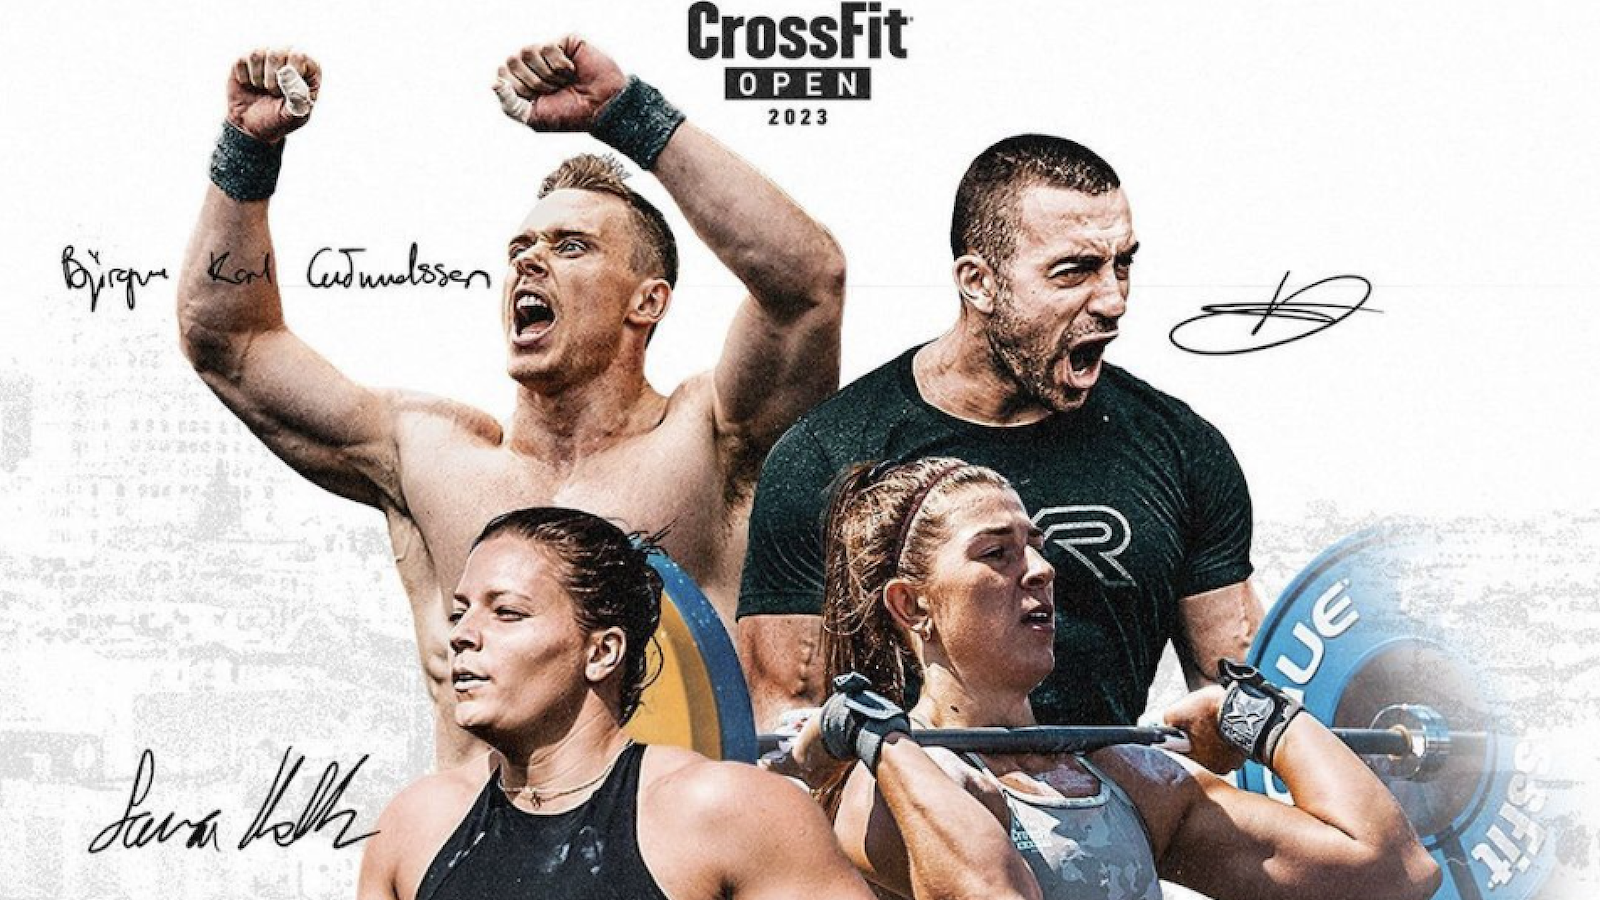 2023 CrossFit Open Workout 23.1 To Be Announced On Feb. 16, 2023 BarBend